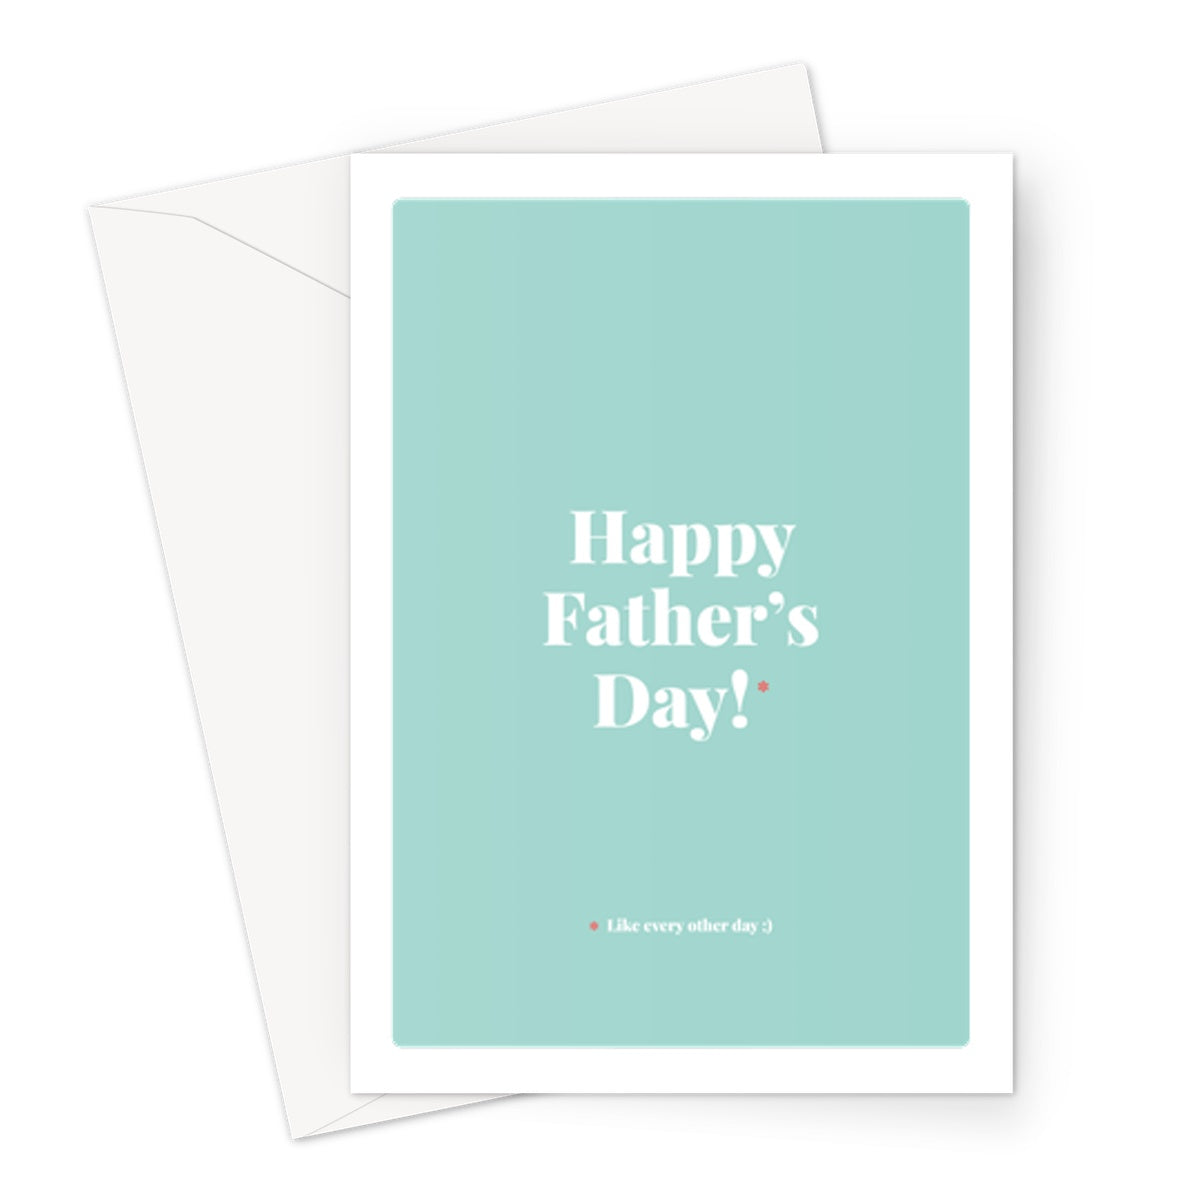 Happy Father's Day - Greeting Card